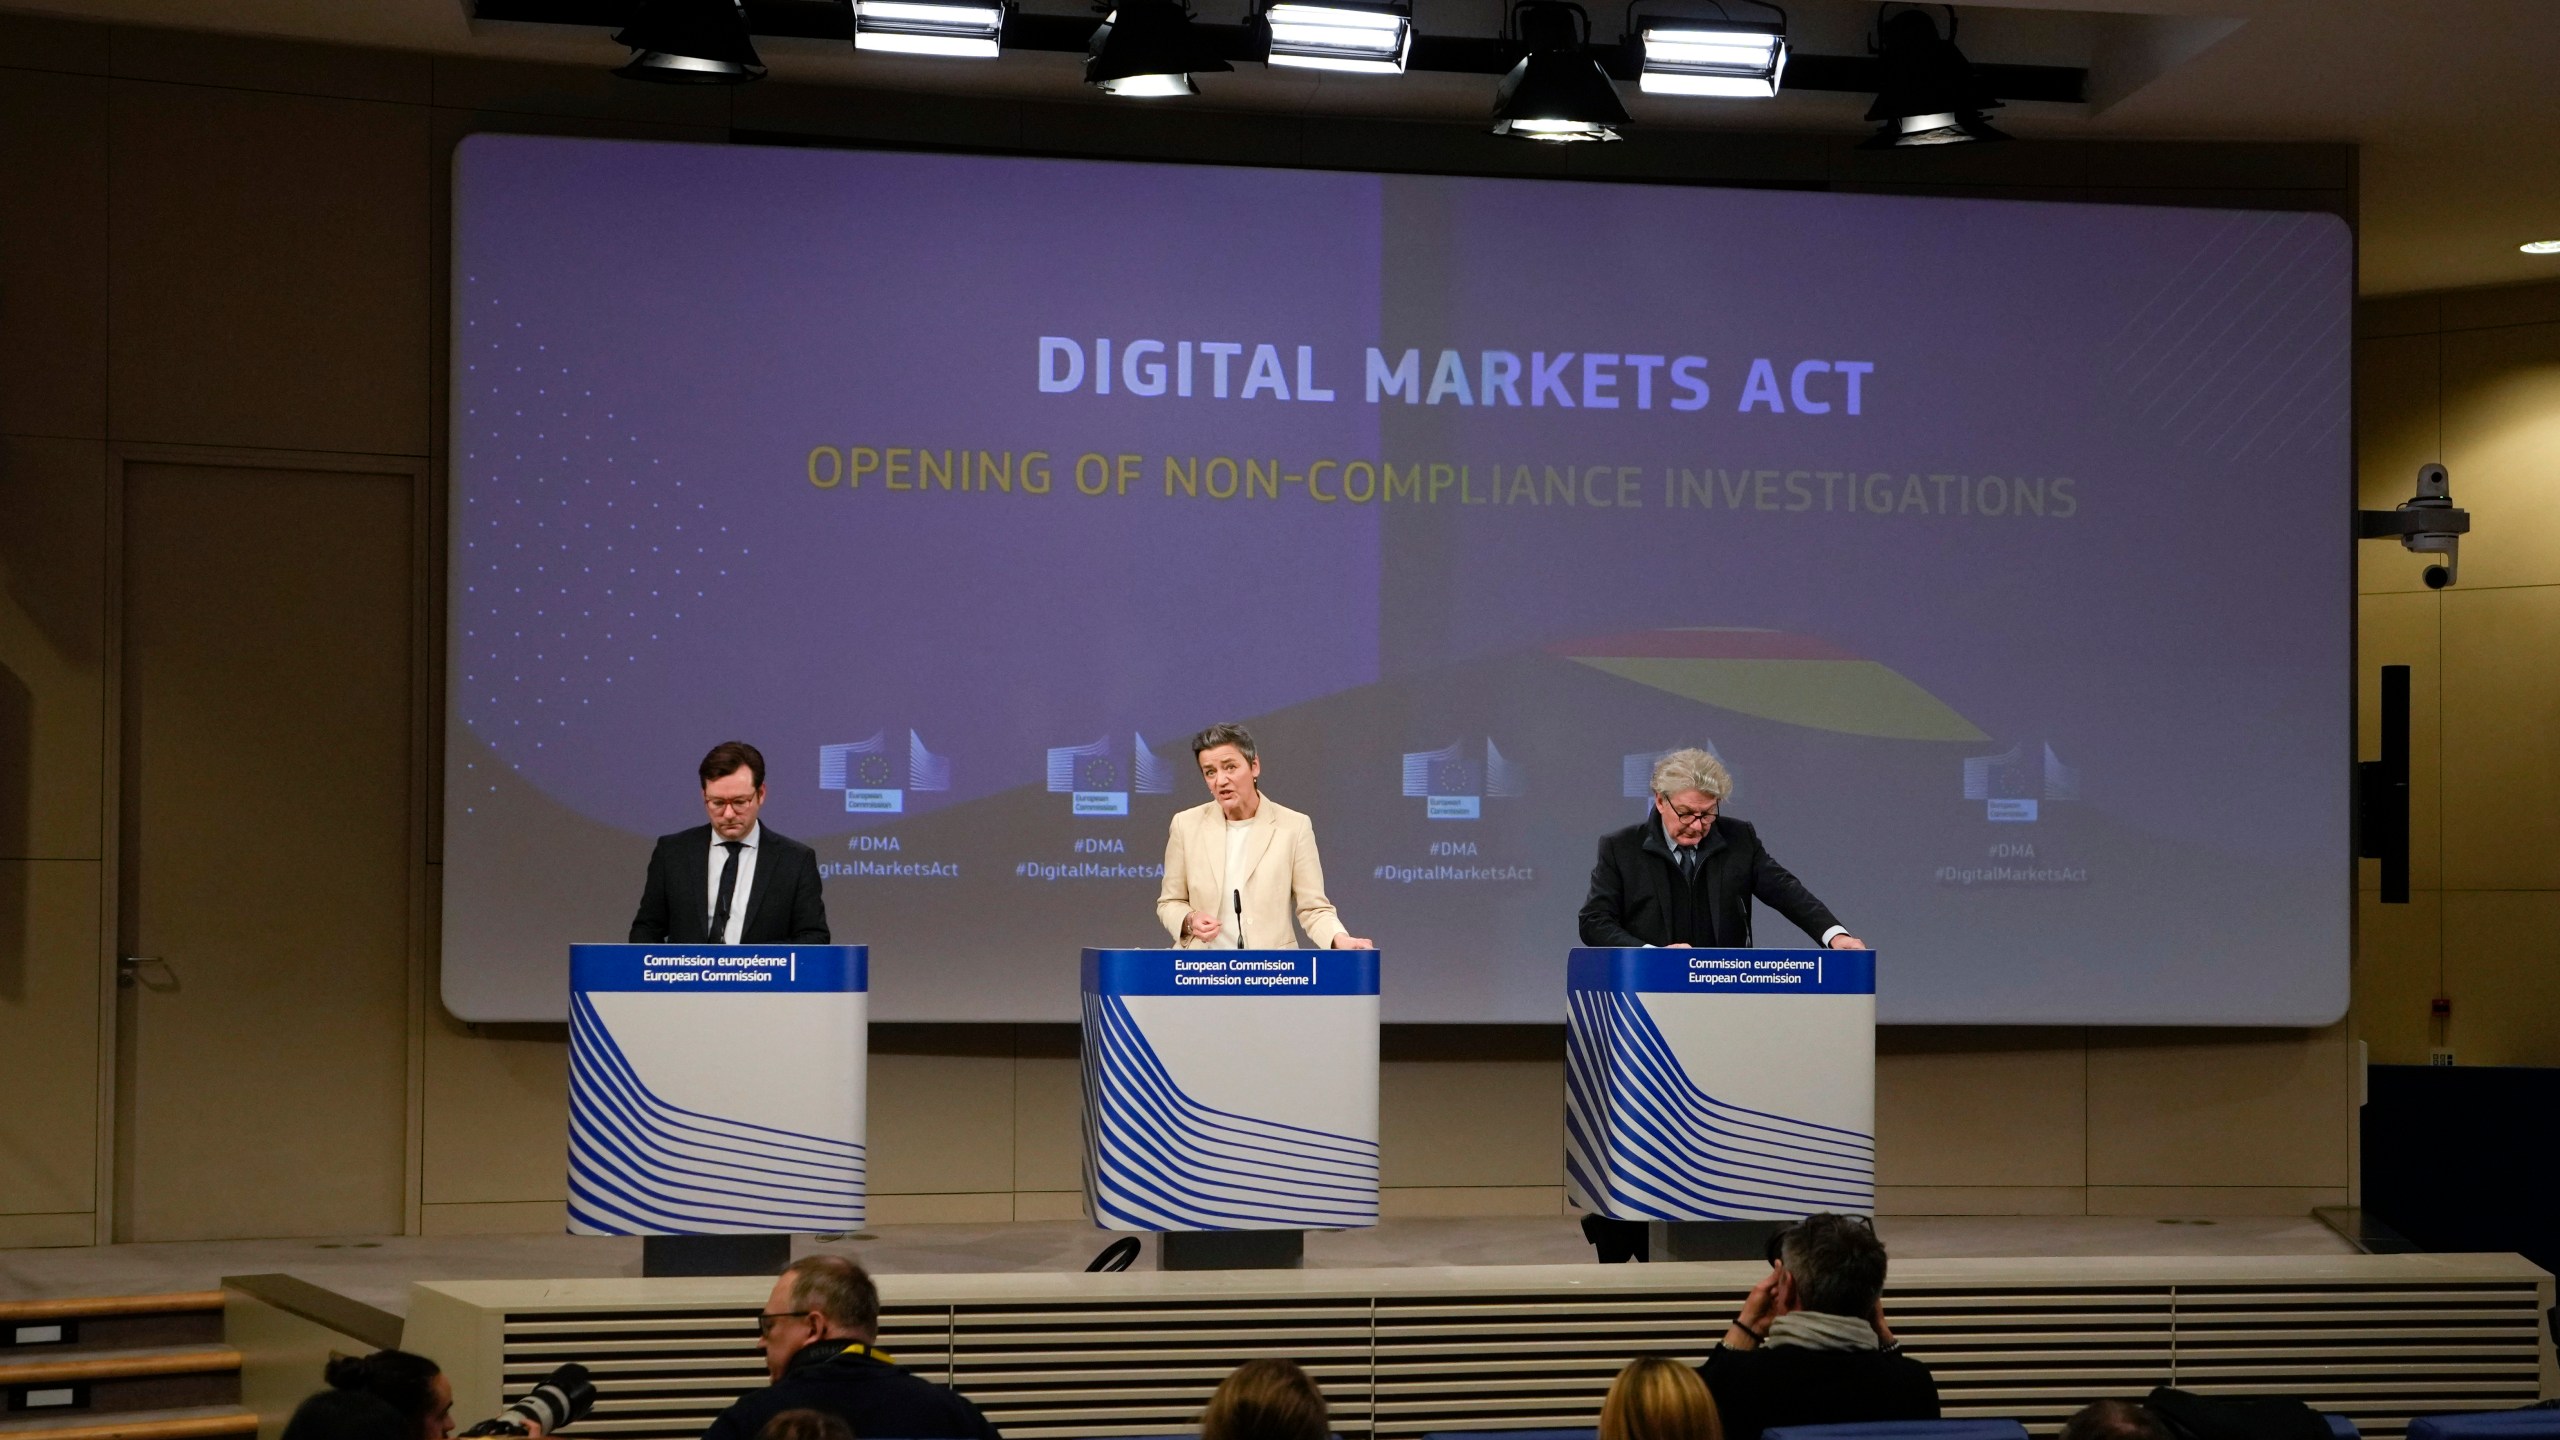 European Commissioner for Europe fit for the Digital Age Margrethe Vestager, center, and European Commissioner for Internal Market Thierry Breton, right, address a media conference regarding the Digital Markets Act at EU headquarters in Brussels, Monday, March 25, 2024. The European Commission on Monday opened non-compliance investigations against Alphabet, Apple and Meta under the Digital Markets Act. (AP Photo/Virginia Mayo)